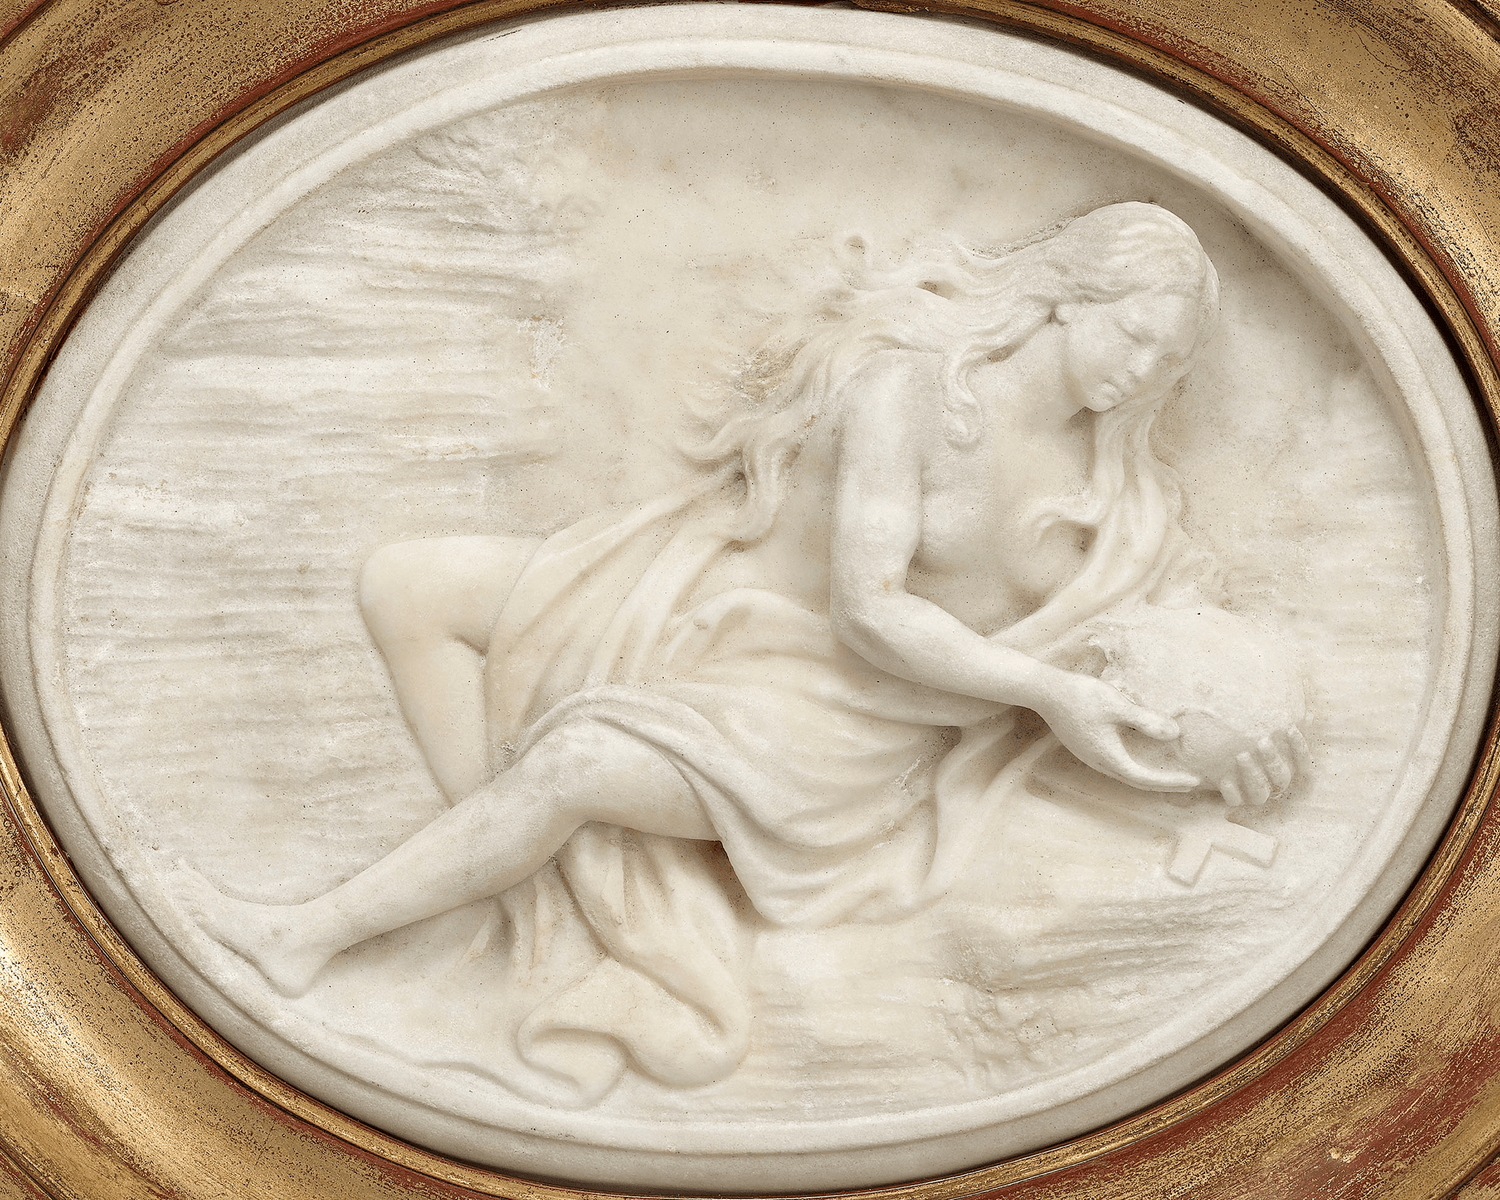 Hand-carved in Italy in the mid-17th century, these stunning plaques are true rarities